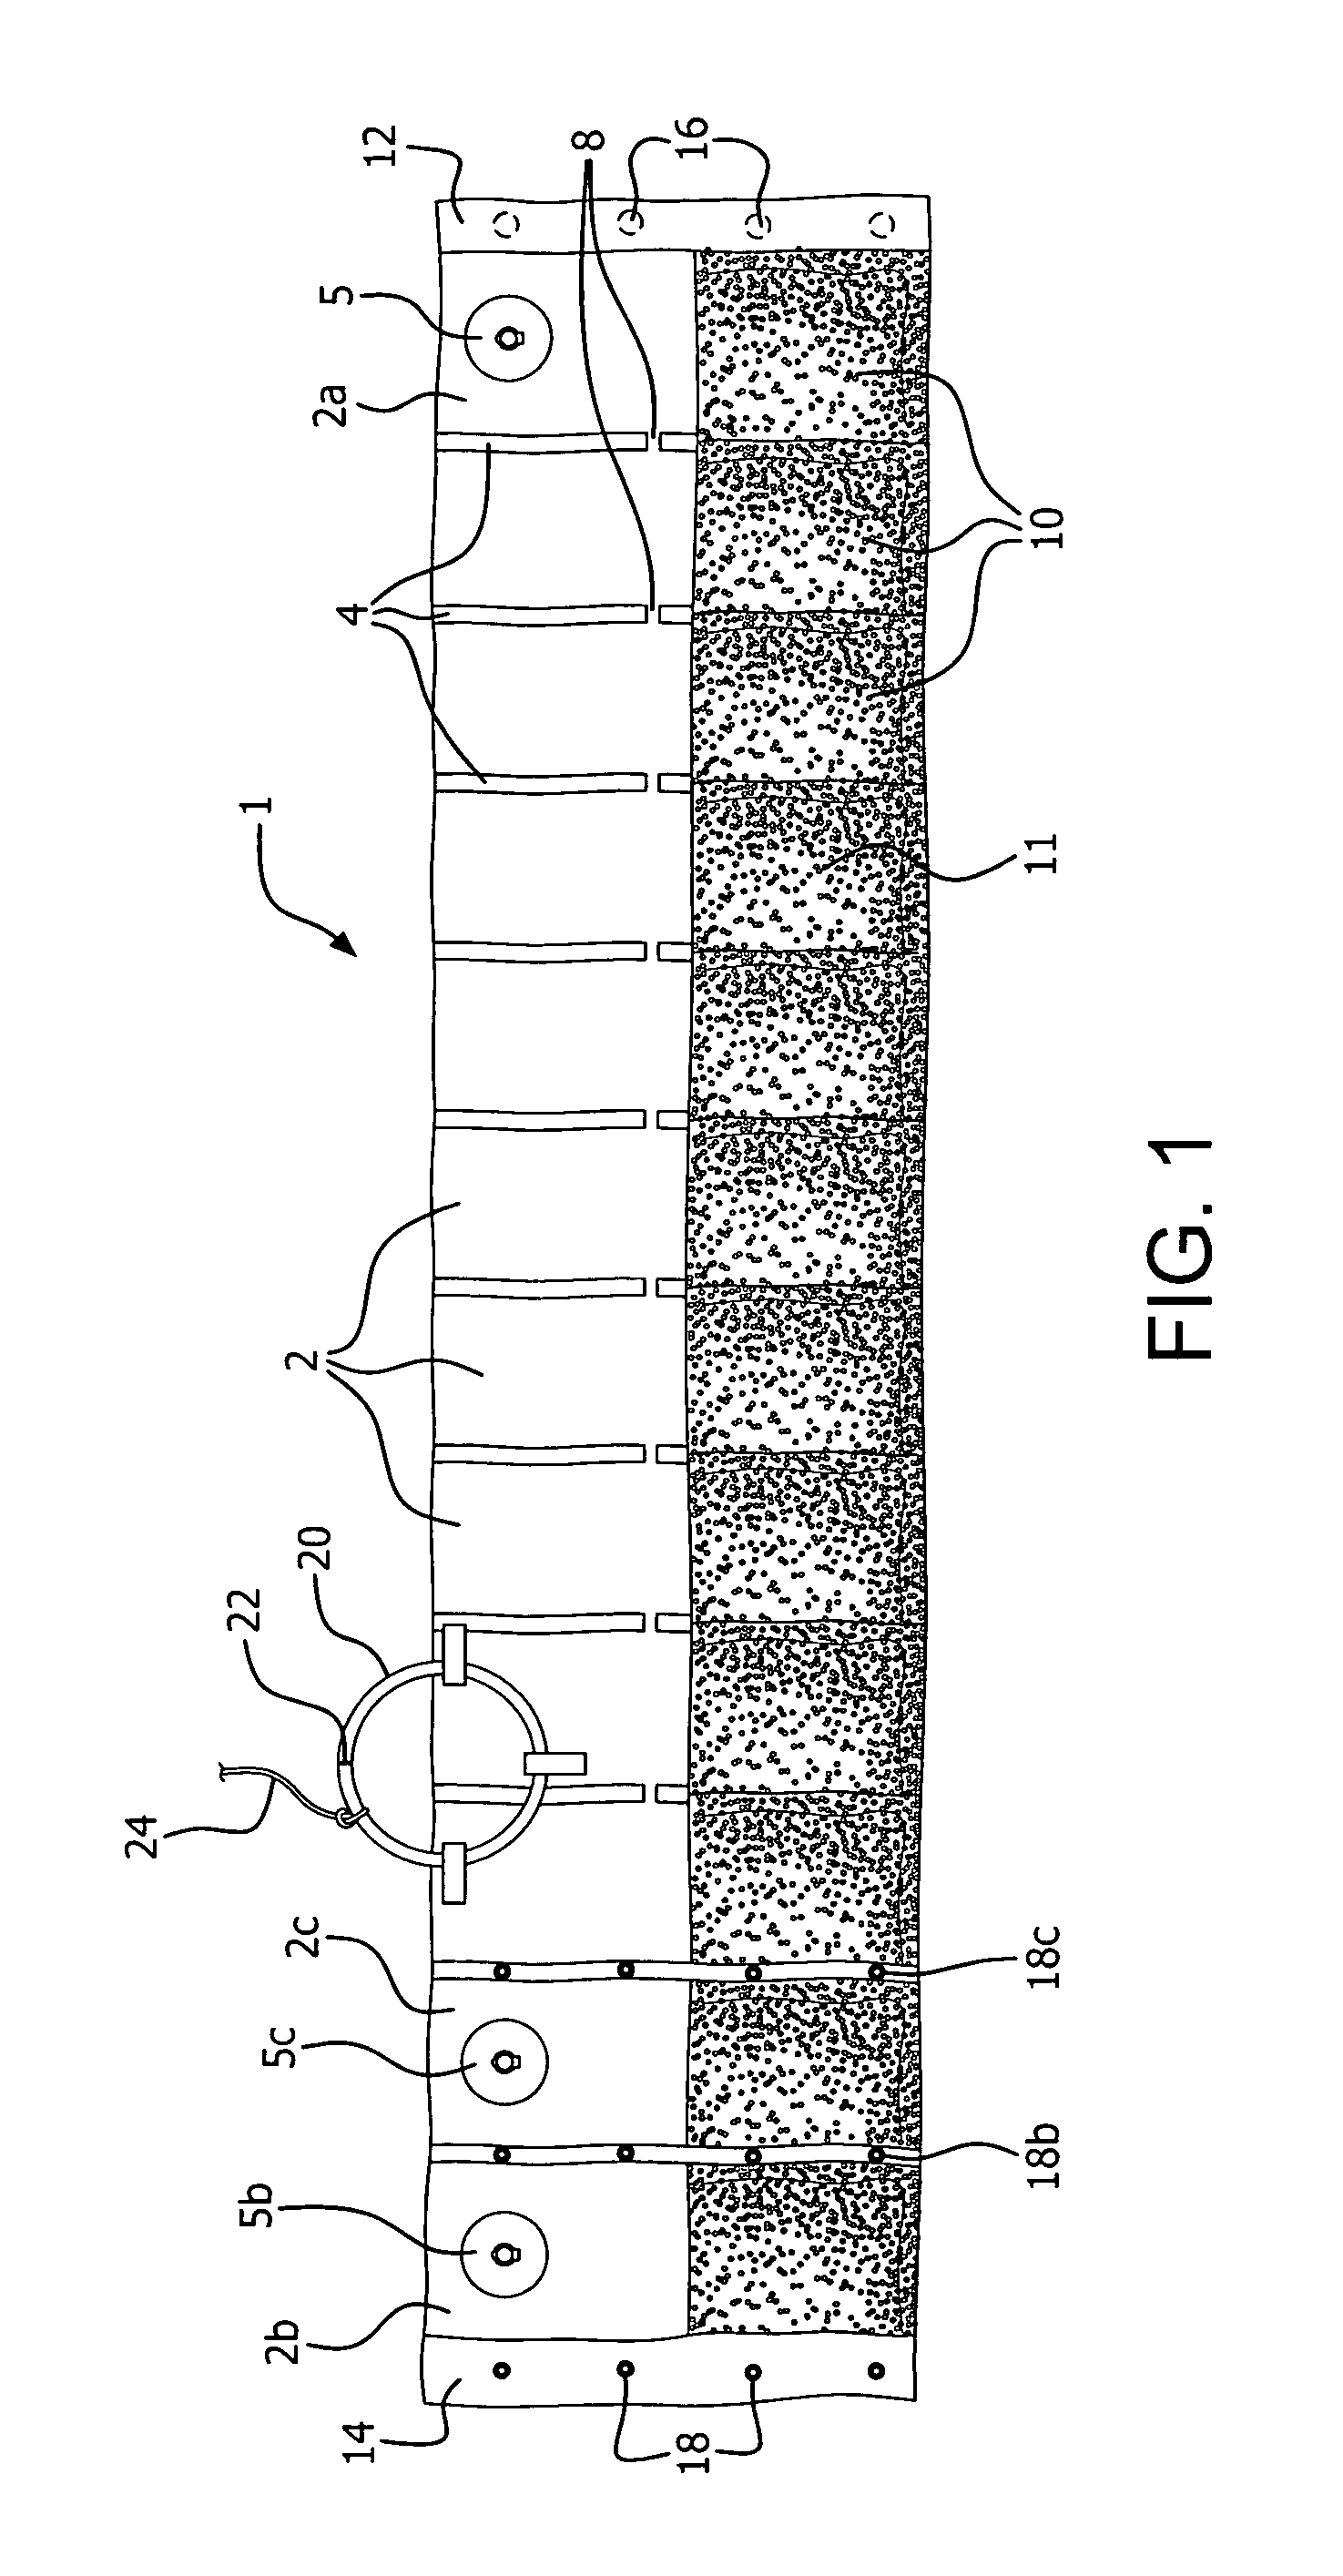 Protective cover for a mooring buoy and method of deployment